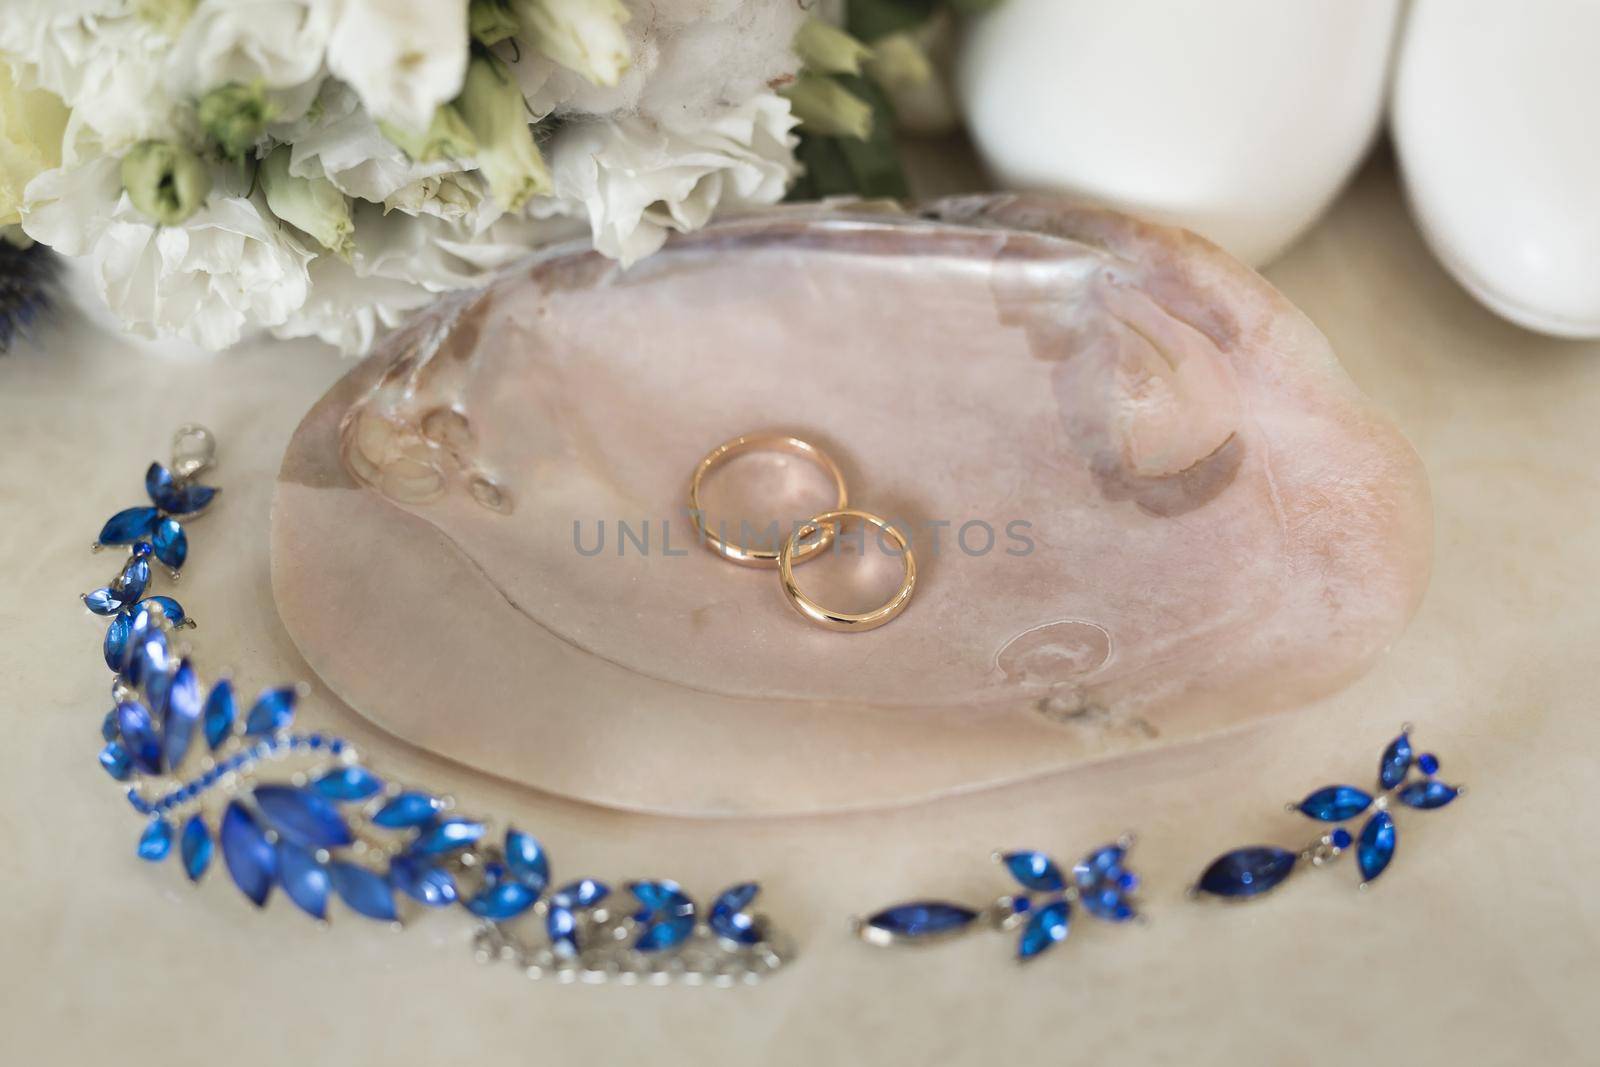 Gold wedding rings on a pink marble shell next to blue jewelry and flowers. by StudioPeace